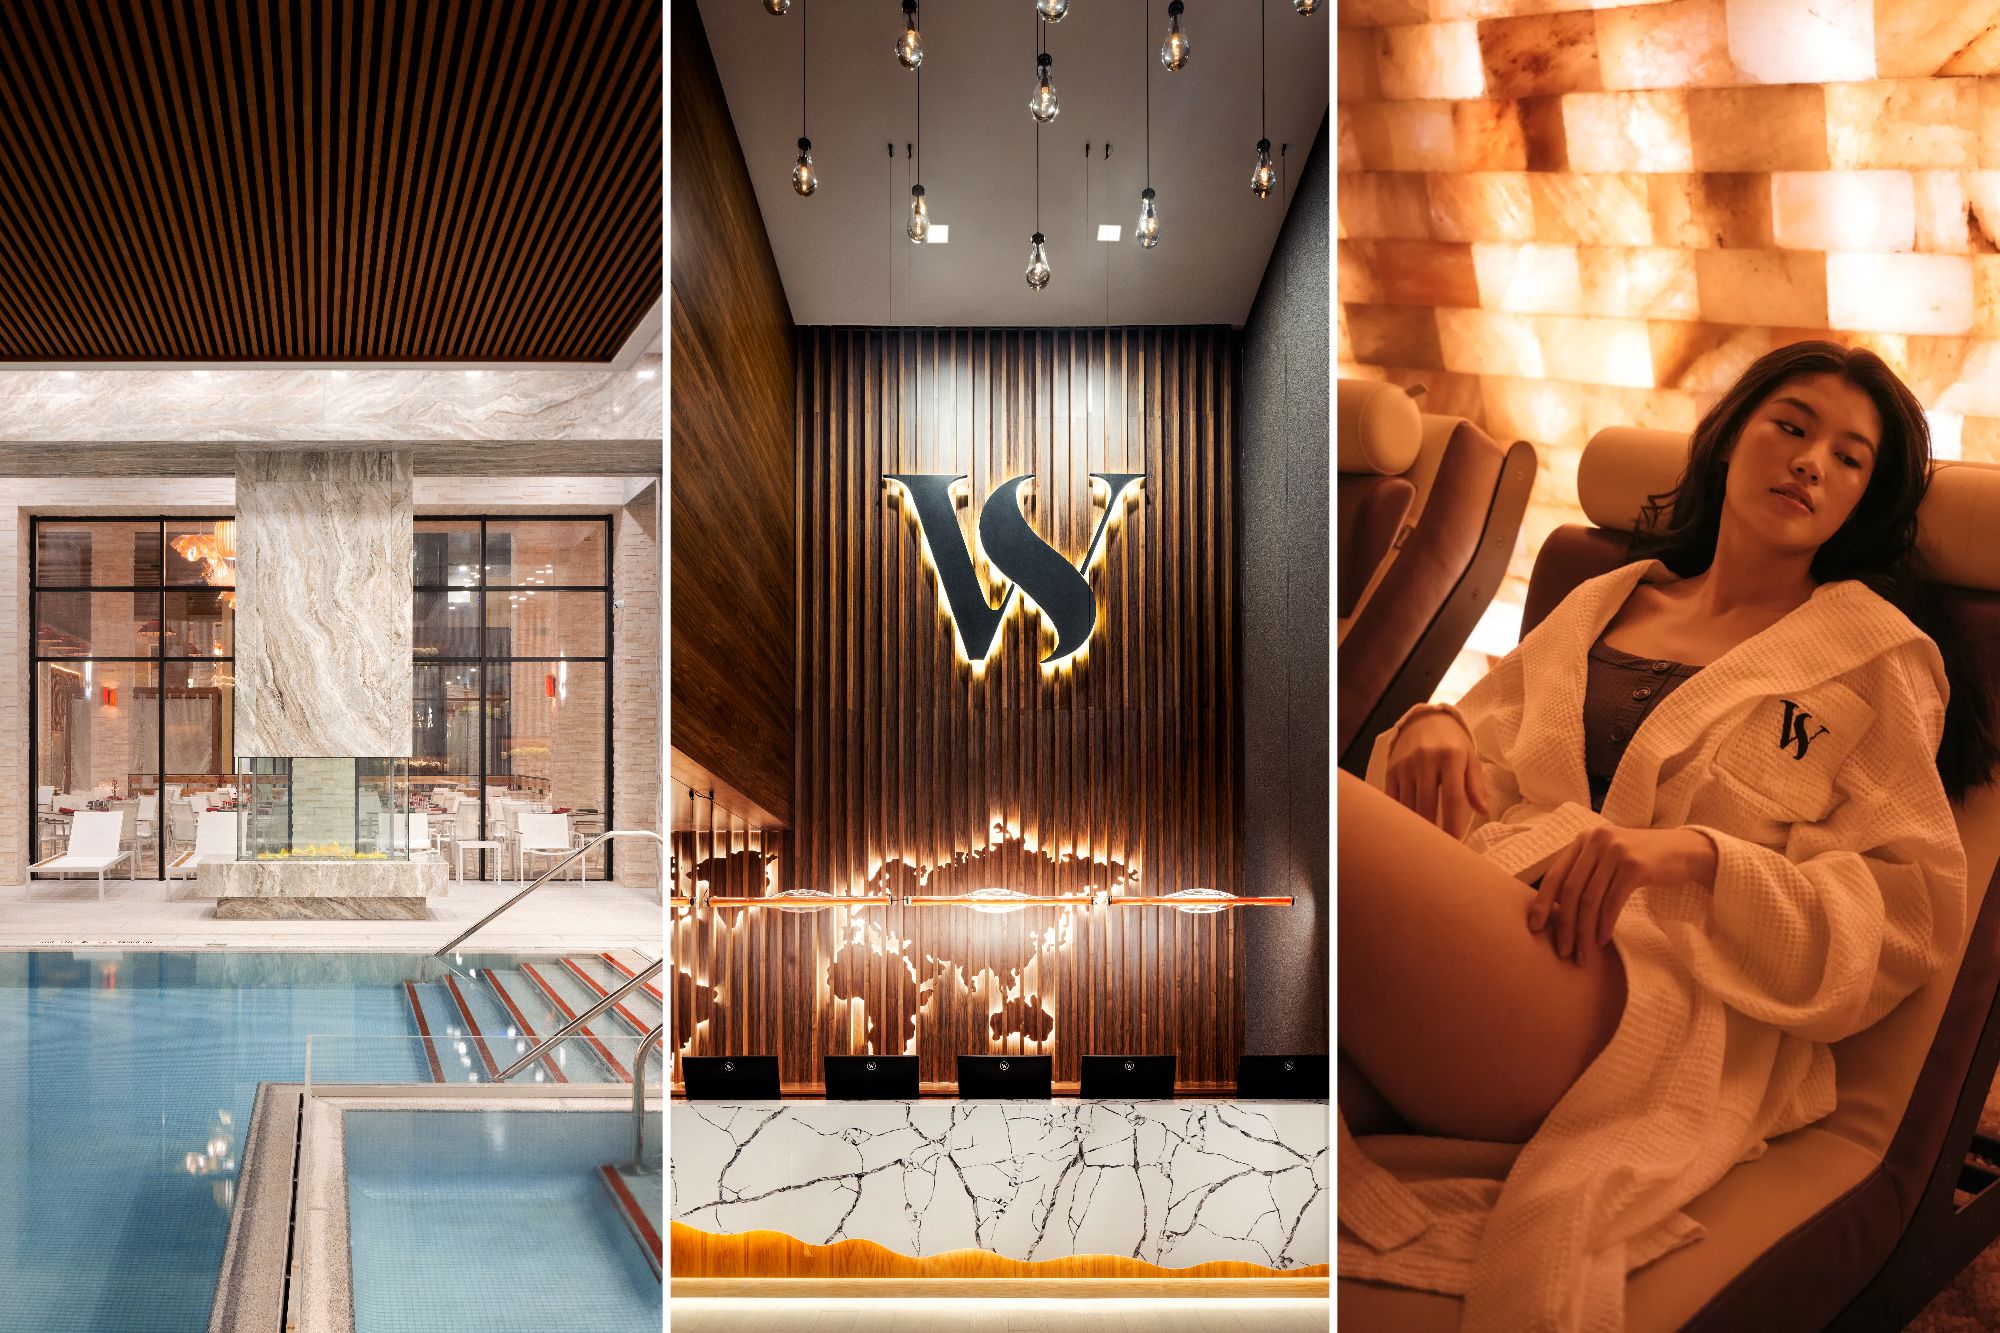 Collage of three images of World Spa: A pool, a large W hovering over the entrance, and a woman relaxing in a World Spa robe.